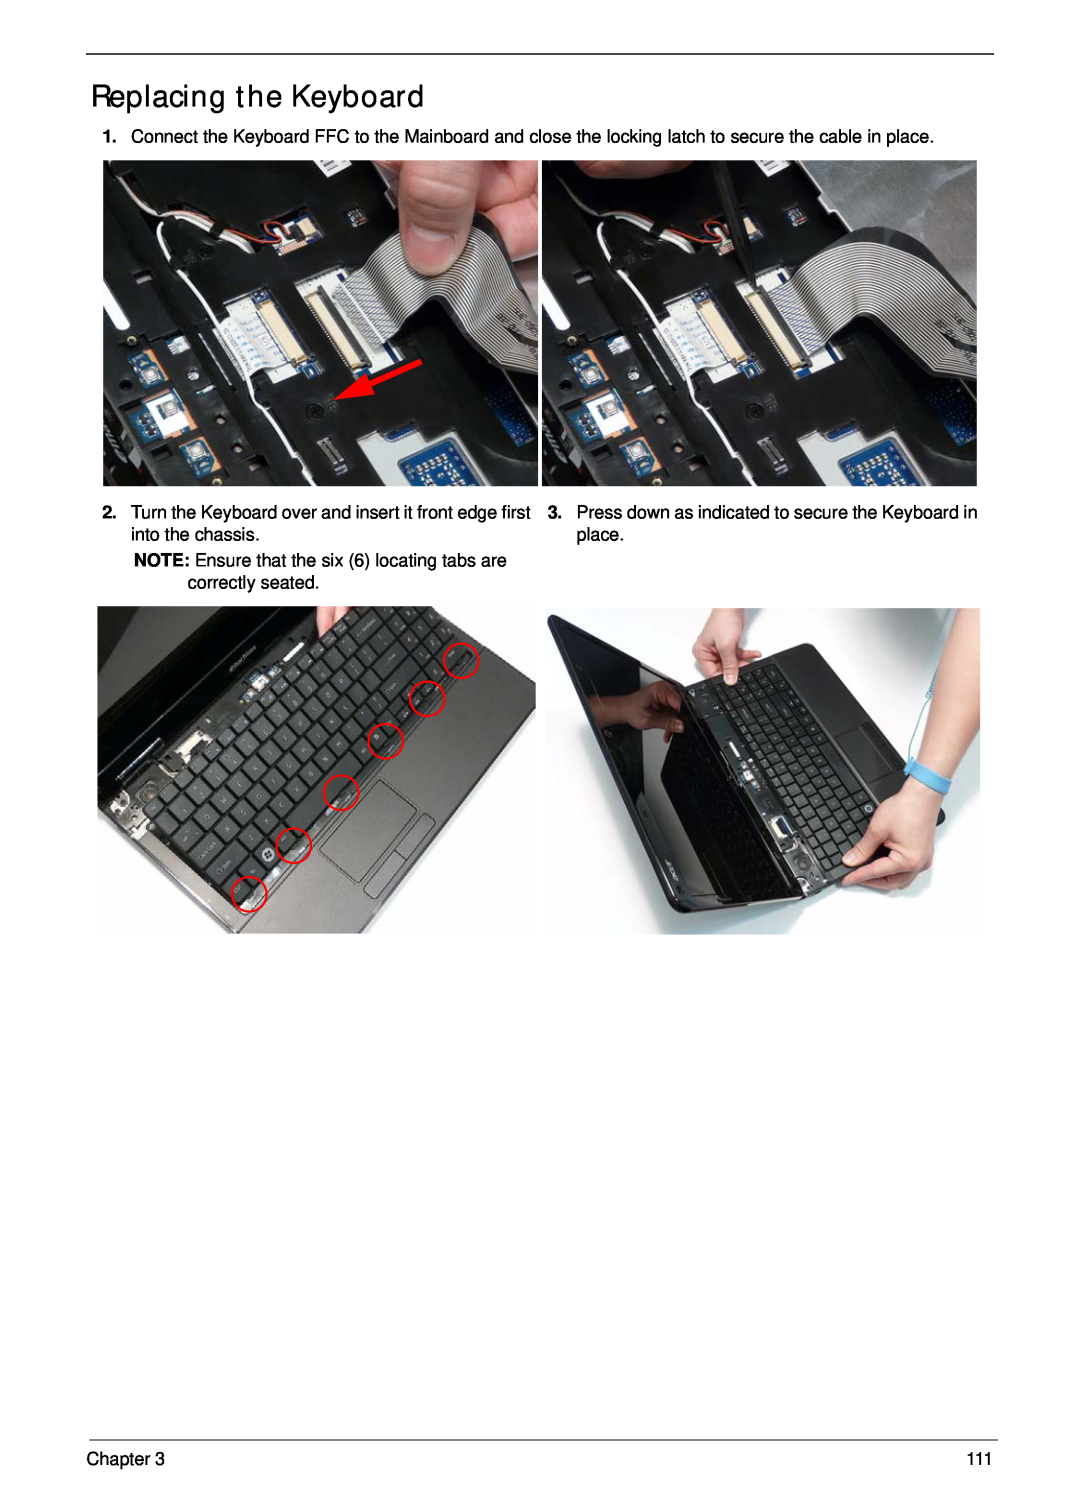 Acer 5532 manual Replacing the Keyboard, NOTE Ensure that the six 6 locating tabs are correctly seated, Chapter 